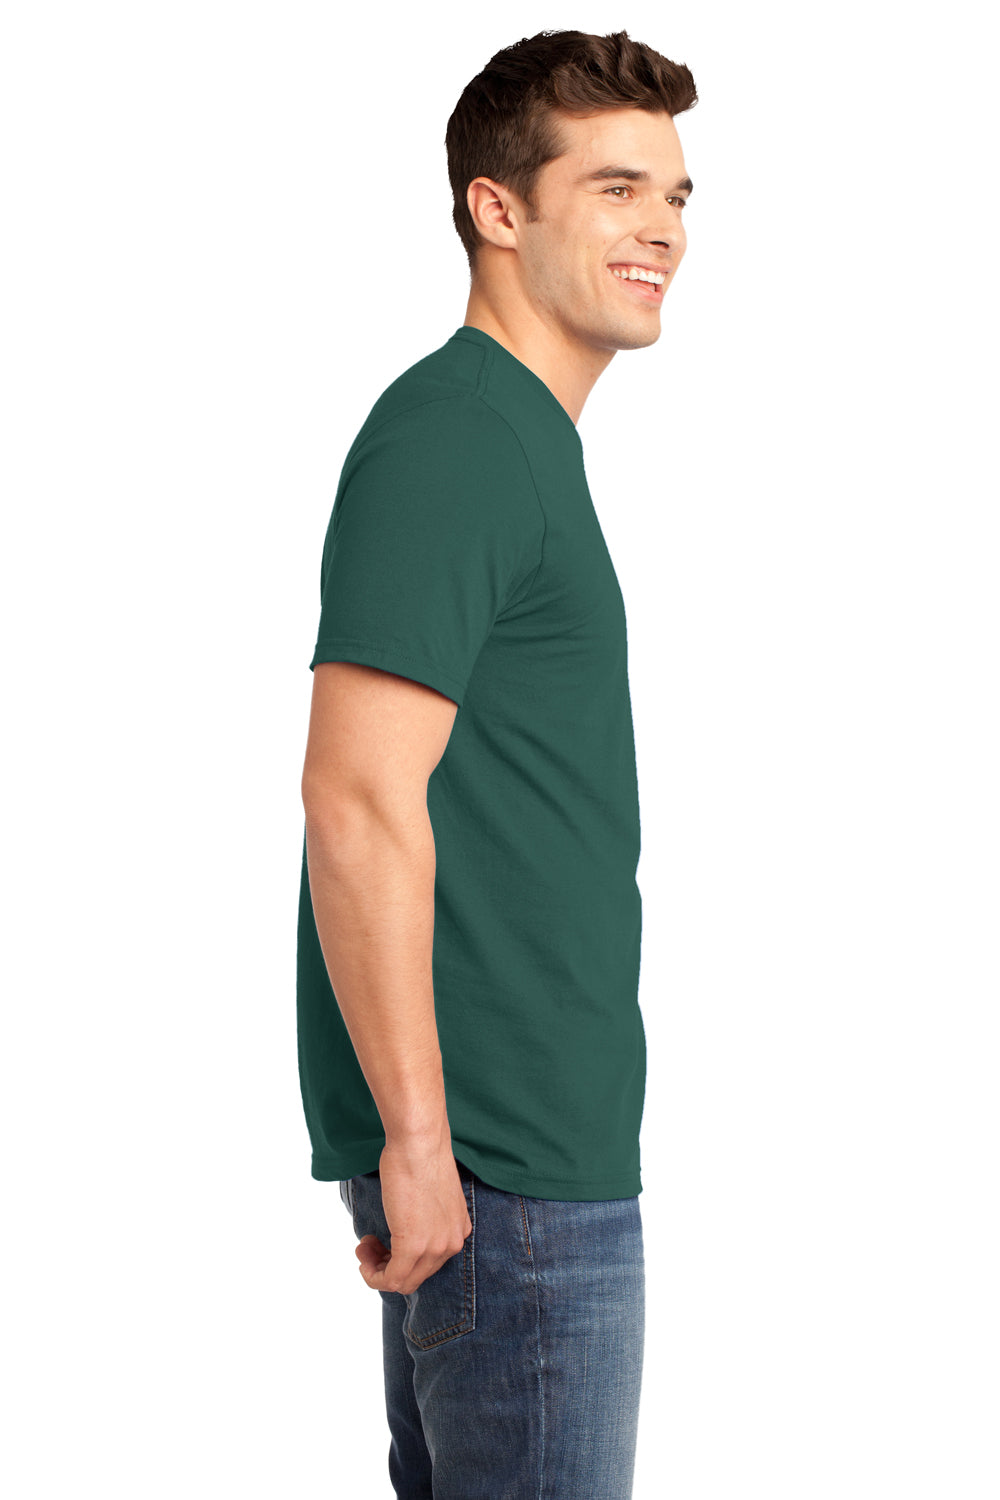 District DT6000 Mens Very Important Short Sleeve Crewneck T-Shirt Evergreen Side